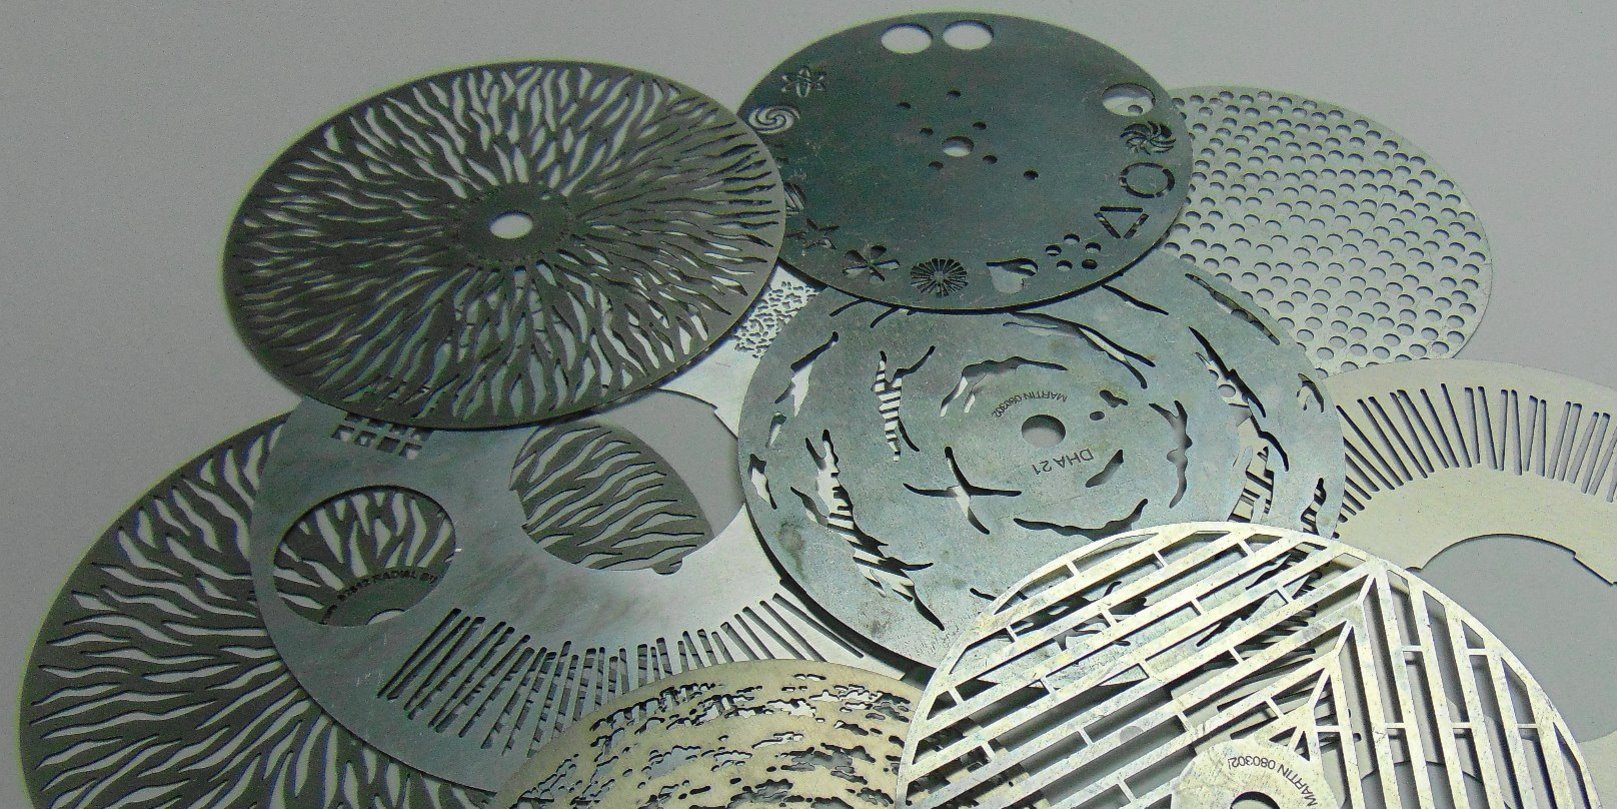 Etch Tech manufacture high-quality, precision GOBOs using the Photo Etching process